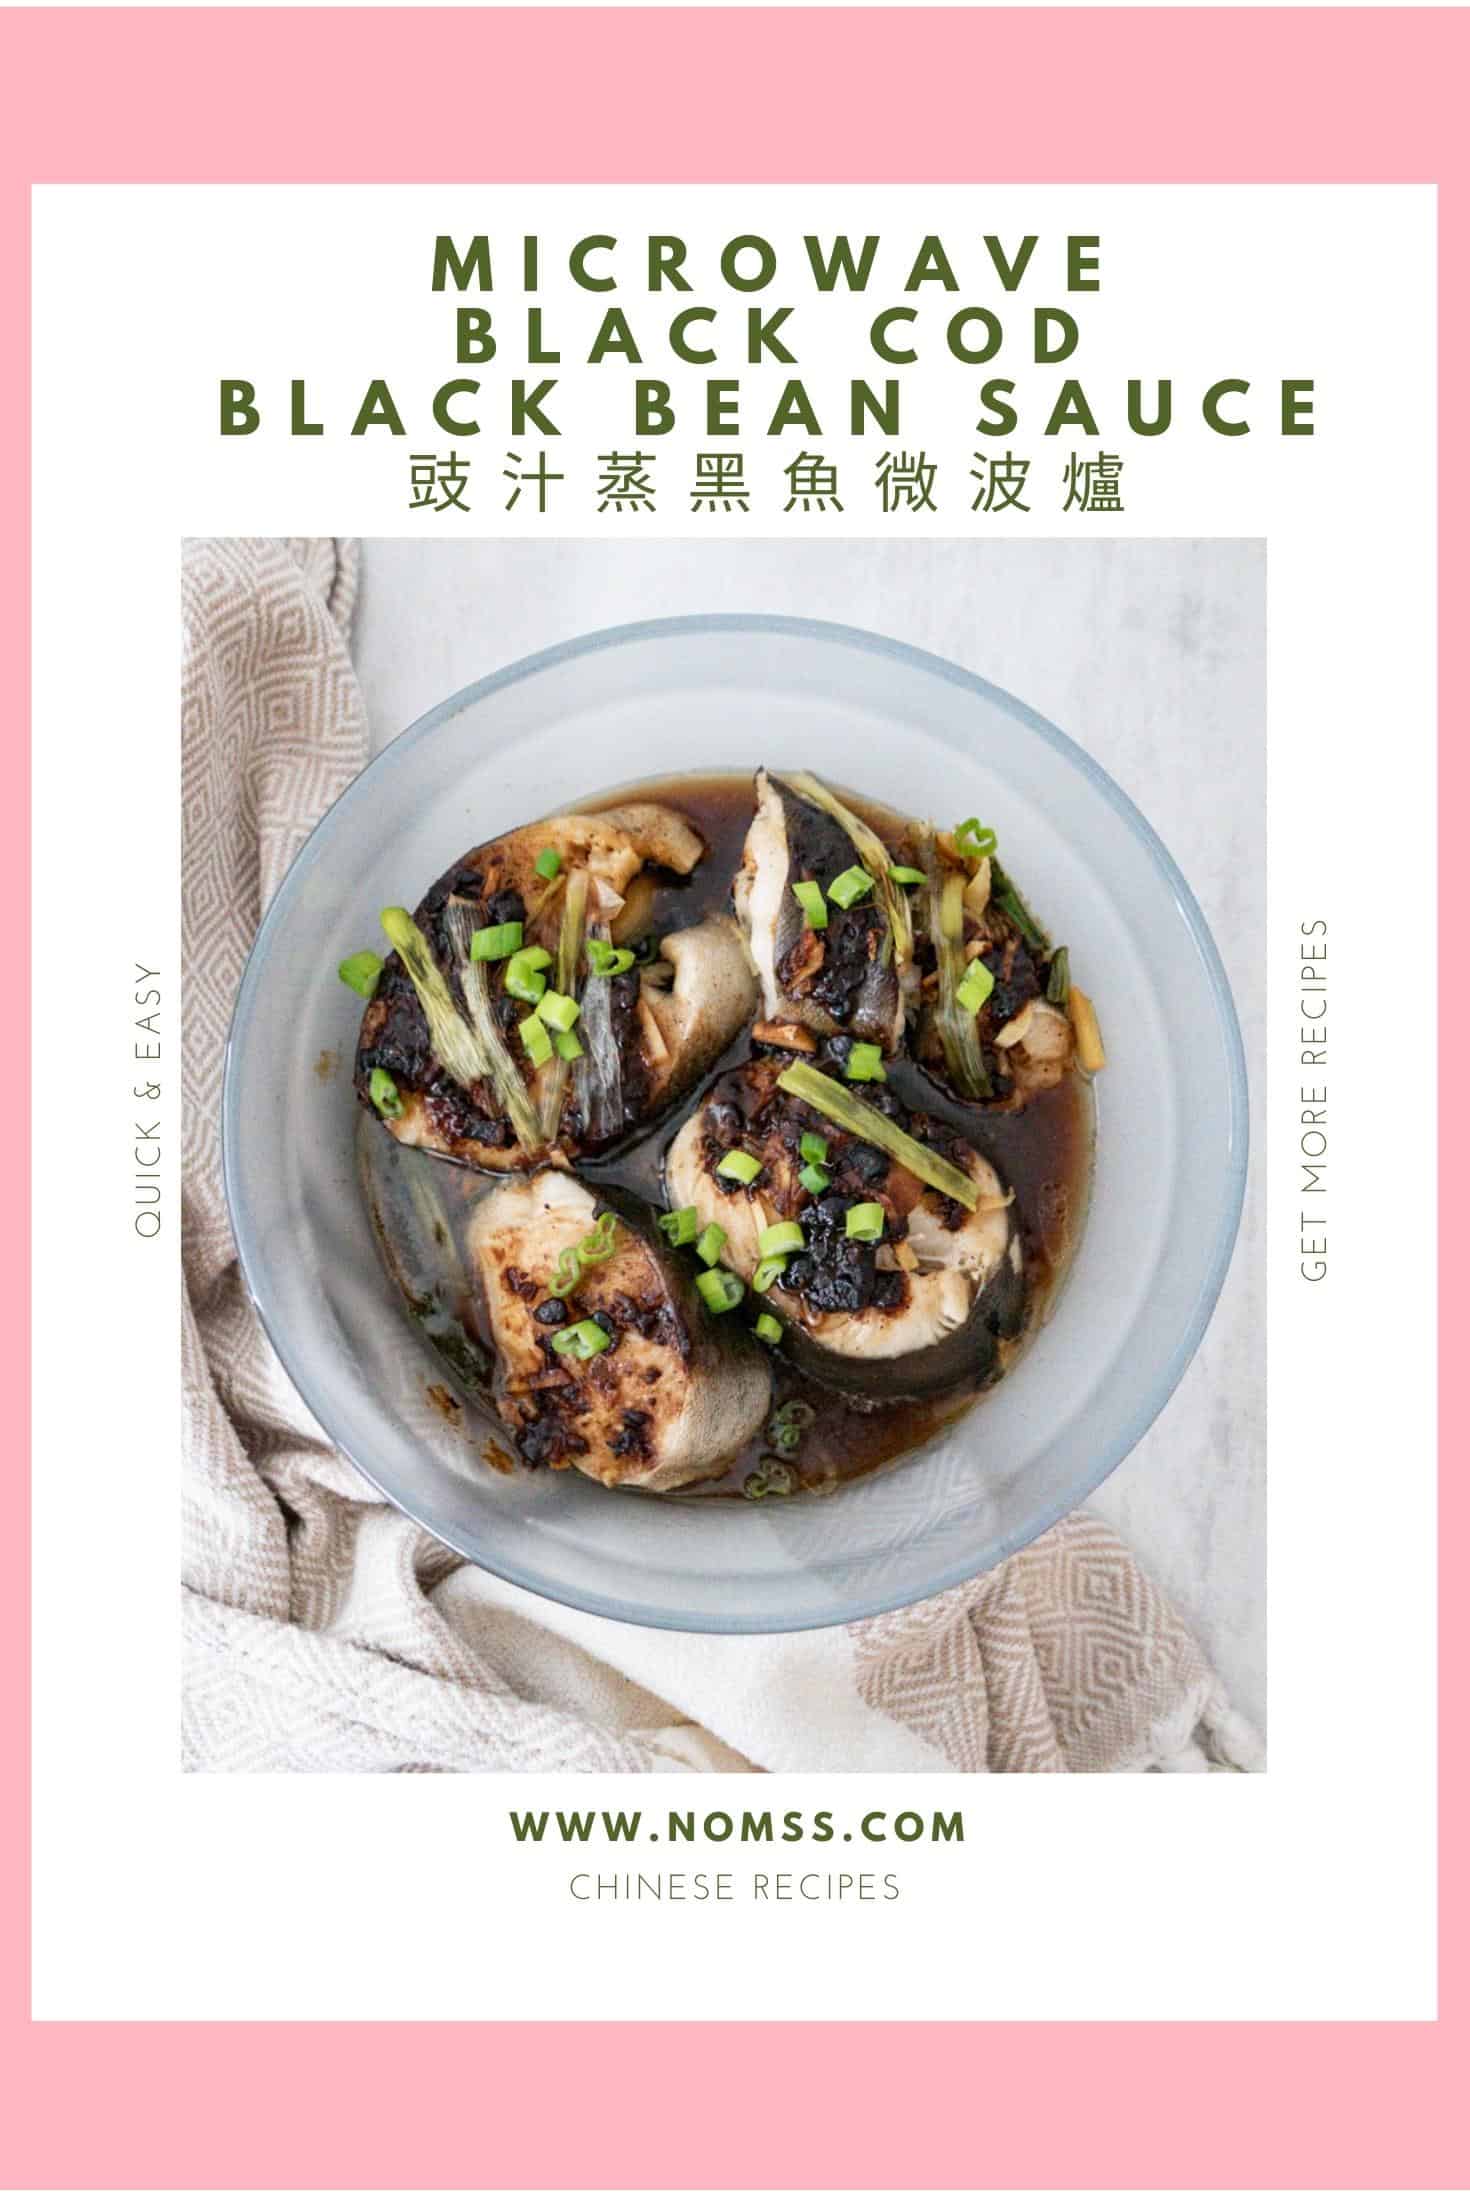 https://www.nomss.com/wp-content/uploads/2021/12/Cook-Anyday-Microwave-Black-Cod-with-Black-Bean-Sauce-pin.jpg